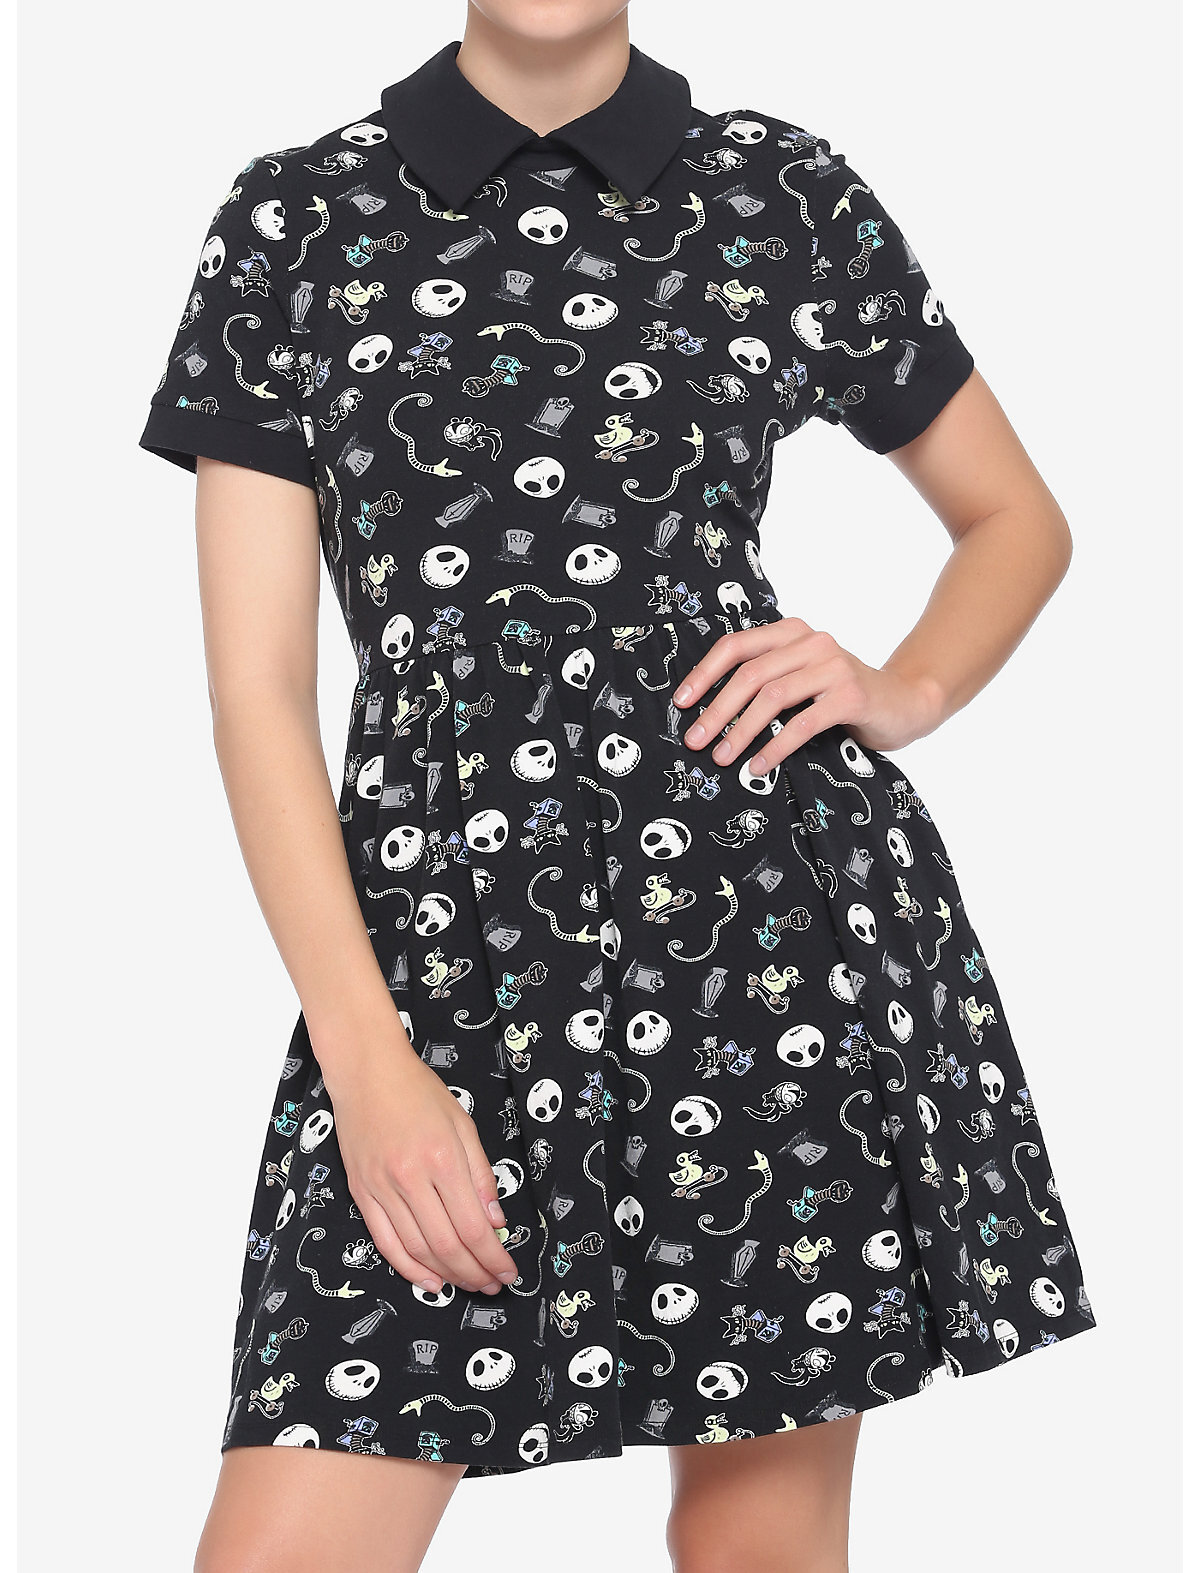 The Nightmare Before Christmas Icons Collar Dress